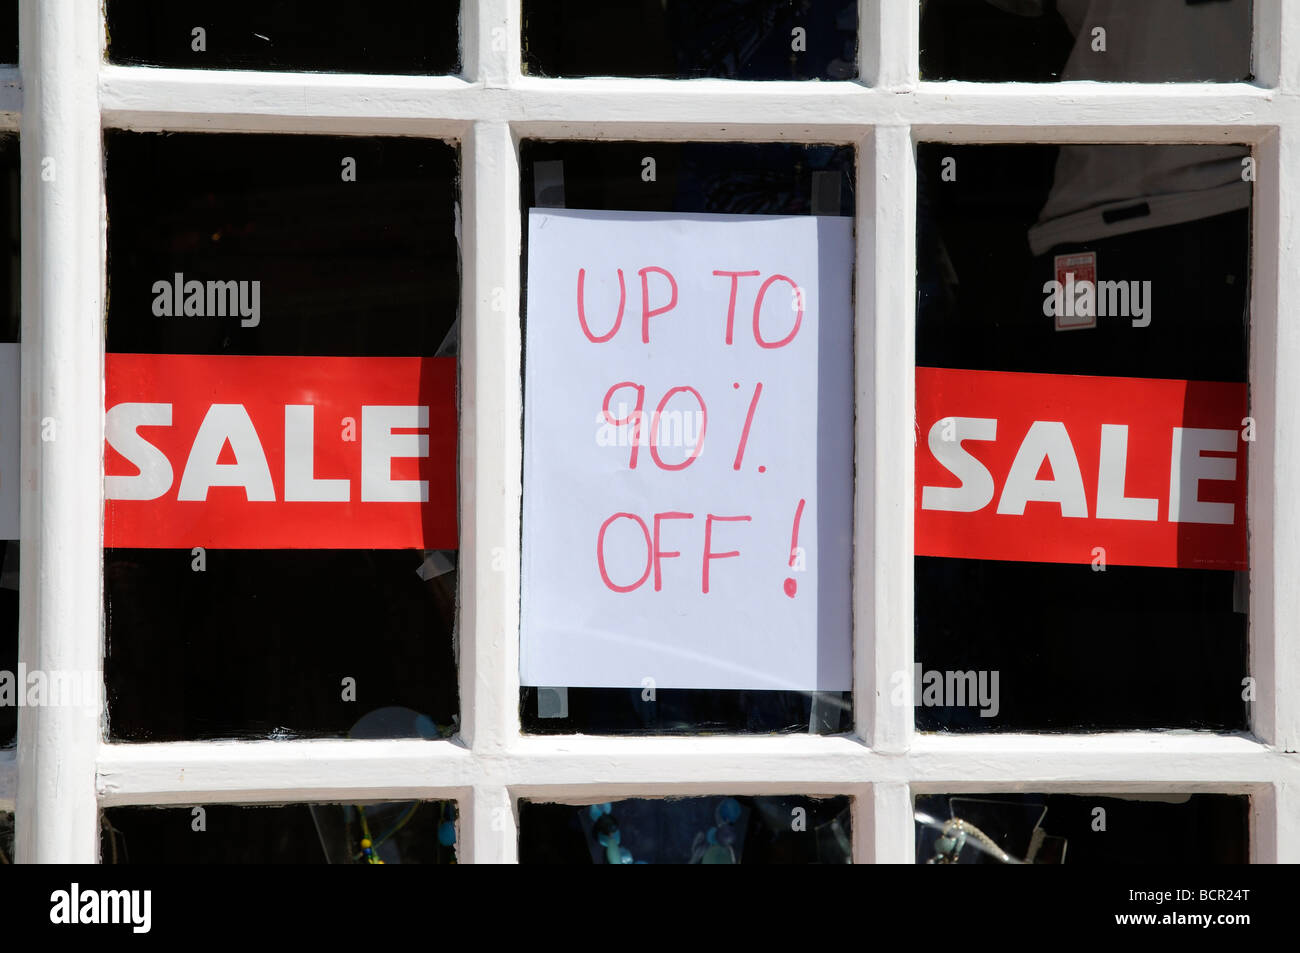 Sale sign upto 90 percent reductions in a shop window during the British recession Stock Photo